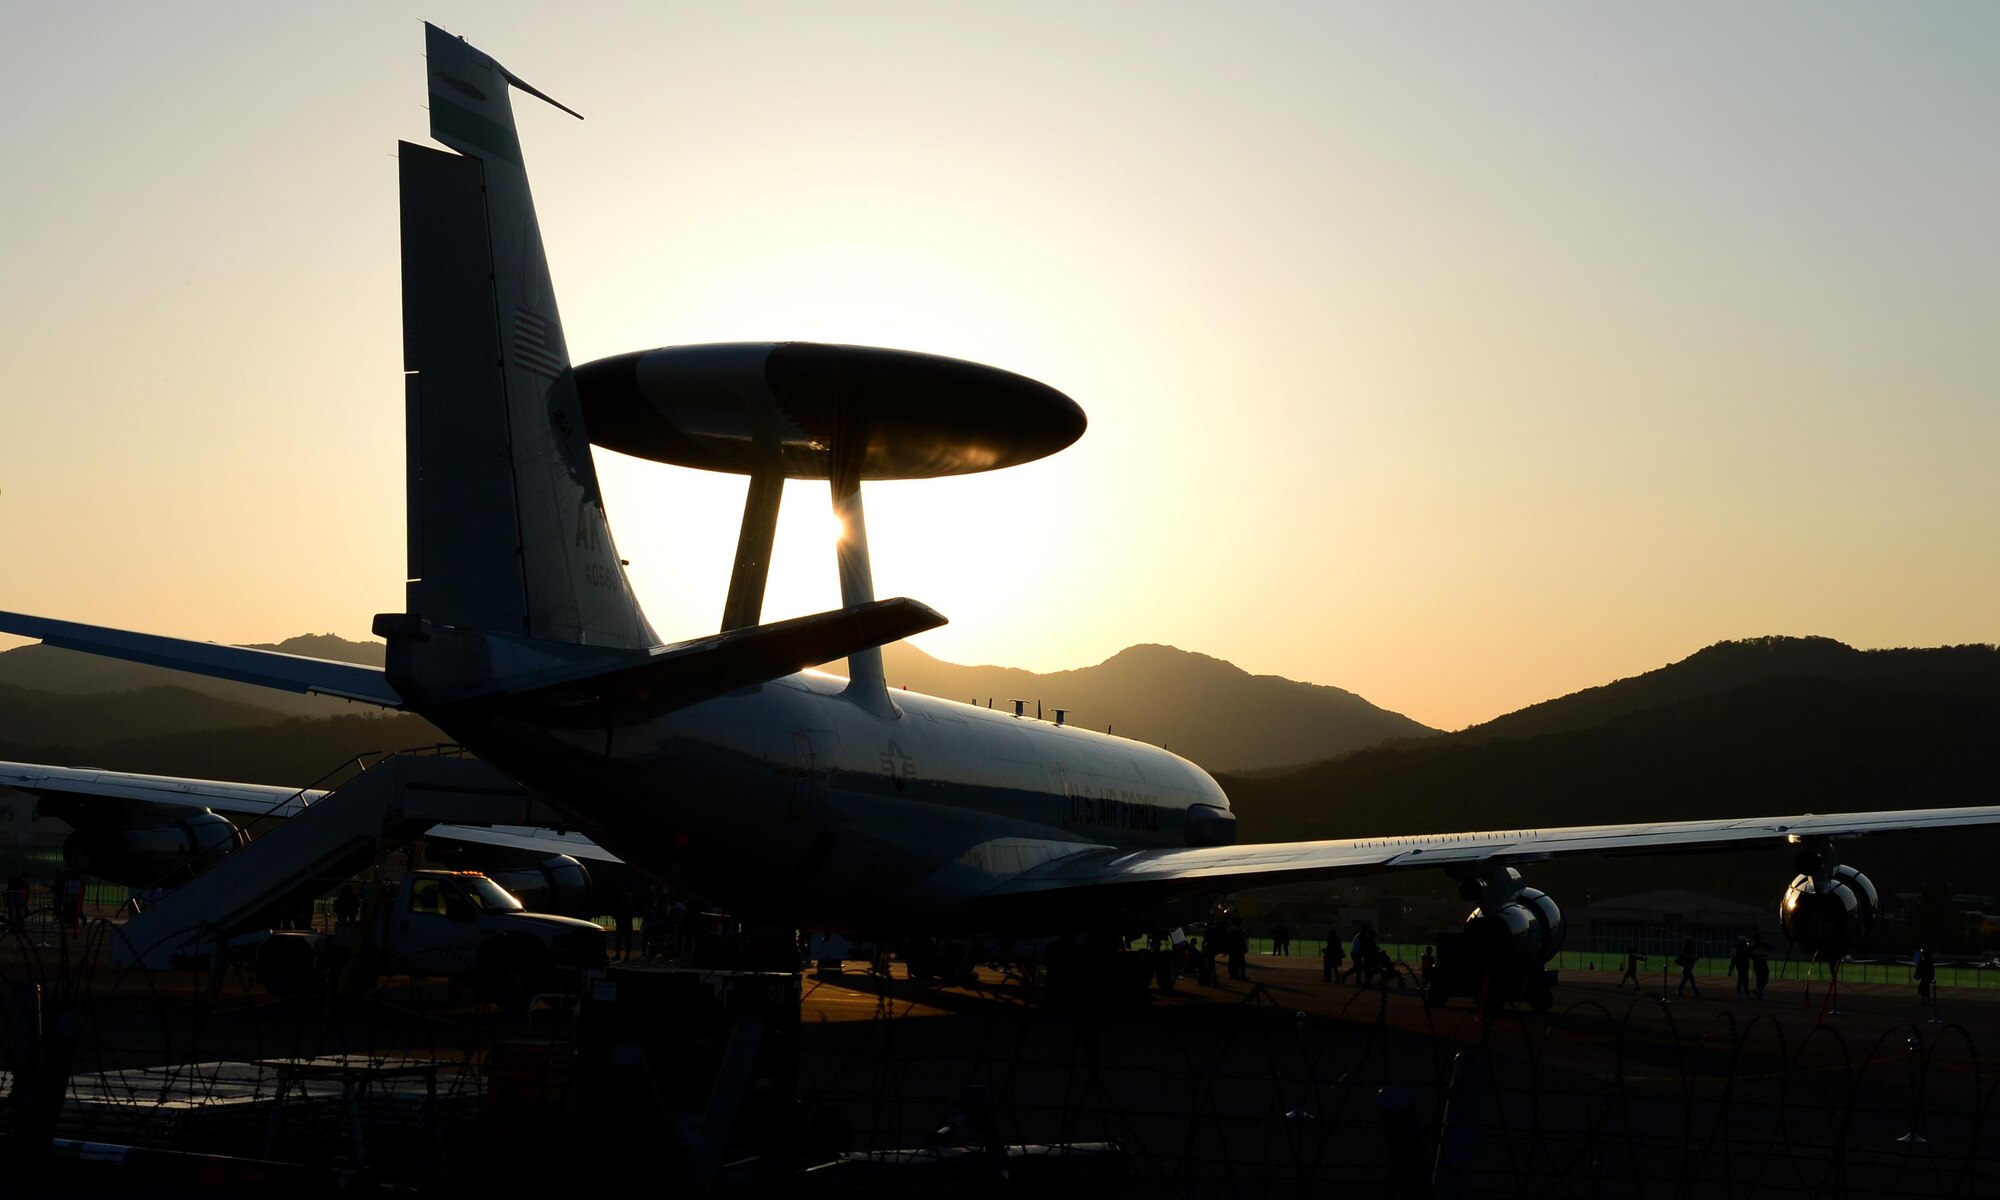 A U.S. Air Force E-3 Sentry airborne warning and control system sits on the flight line during the Seoul International Aerospace and Defense Exhibition 2017 at Seoul Air Base, South Korea, Oct. 21, 2017. The Seoul ADEX is the largest, most comprehensive event of its kind in Northeast Asia, attracting aviation and aerospace professionals, key defense personnel, aviation enthusiasts and the general public alike. (U.S. Air Force photo by Staff Sgt. Alex Fox Echols III)